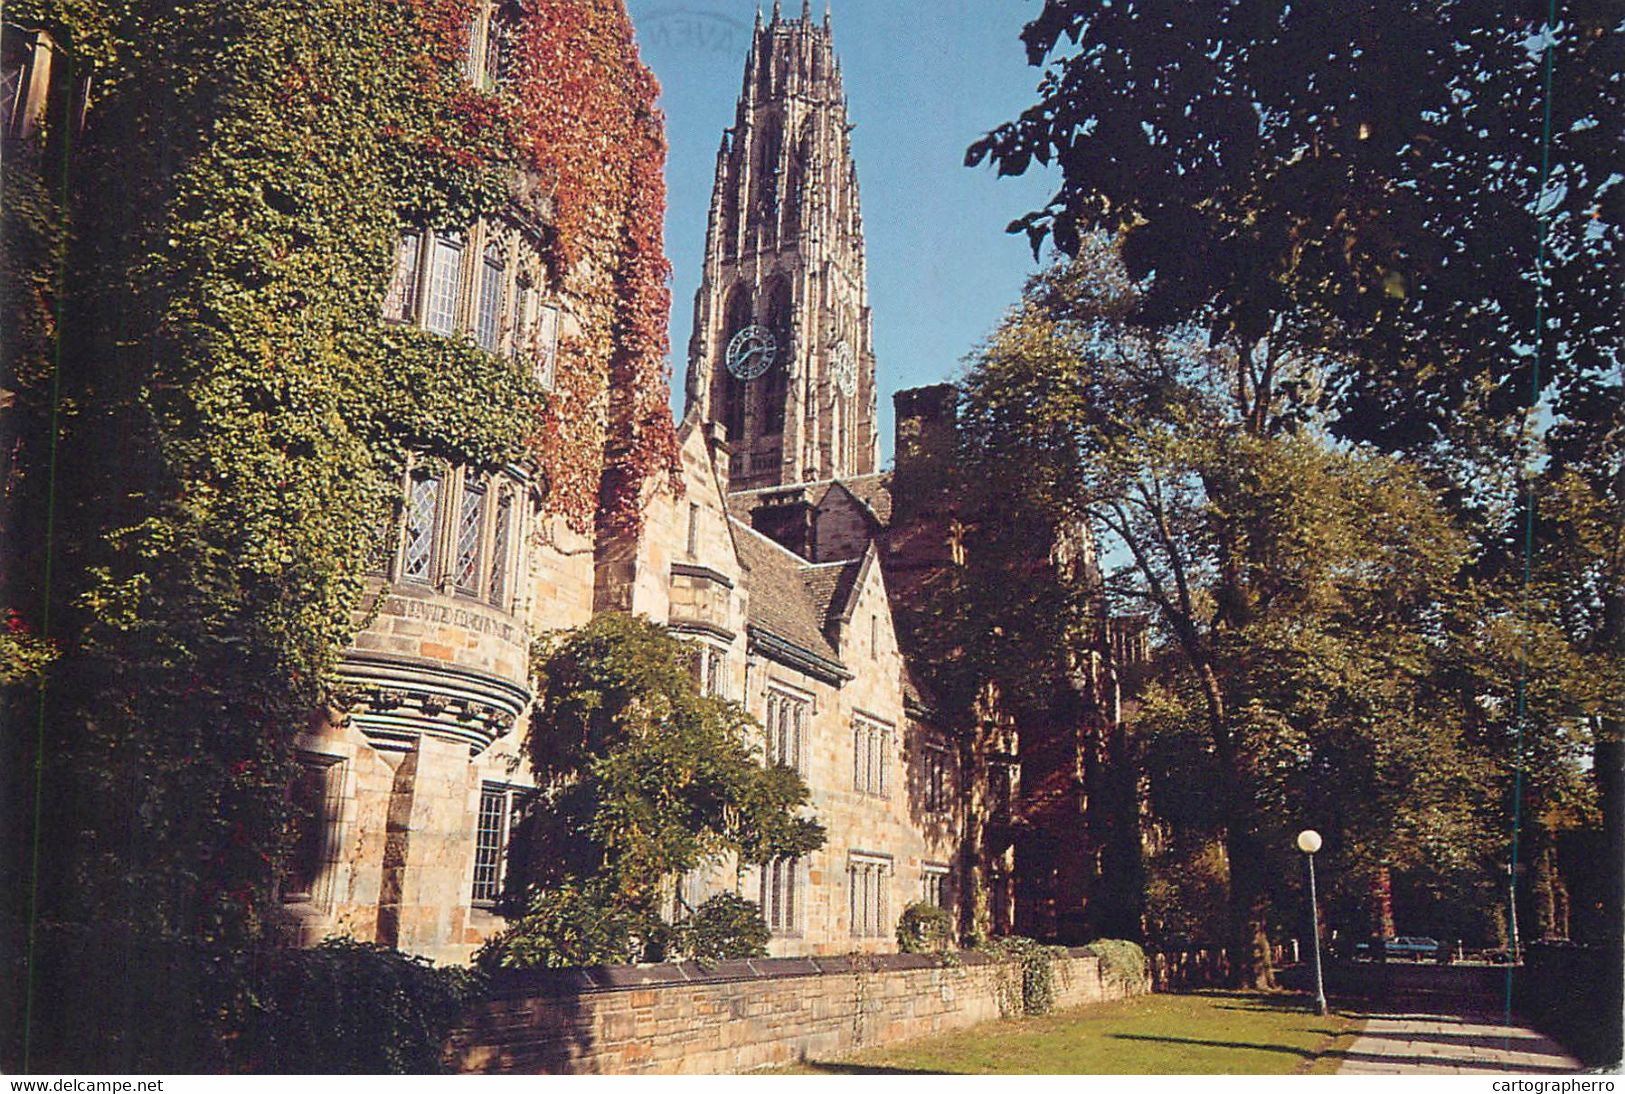 USA America Yale University New Haven CT 1987 Branford College Harkness Memorial Tower Postcard - New Haven